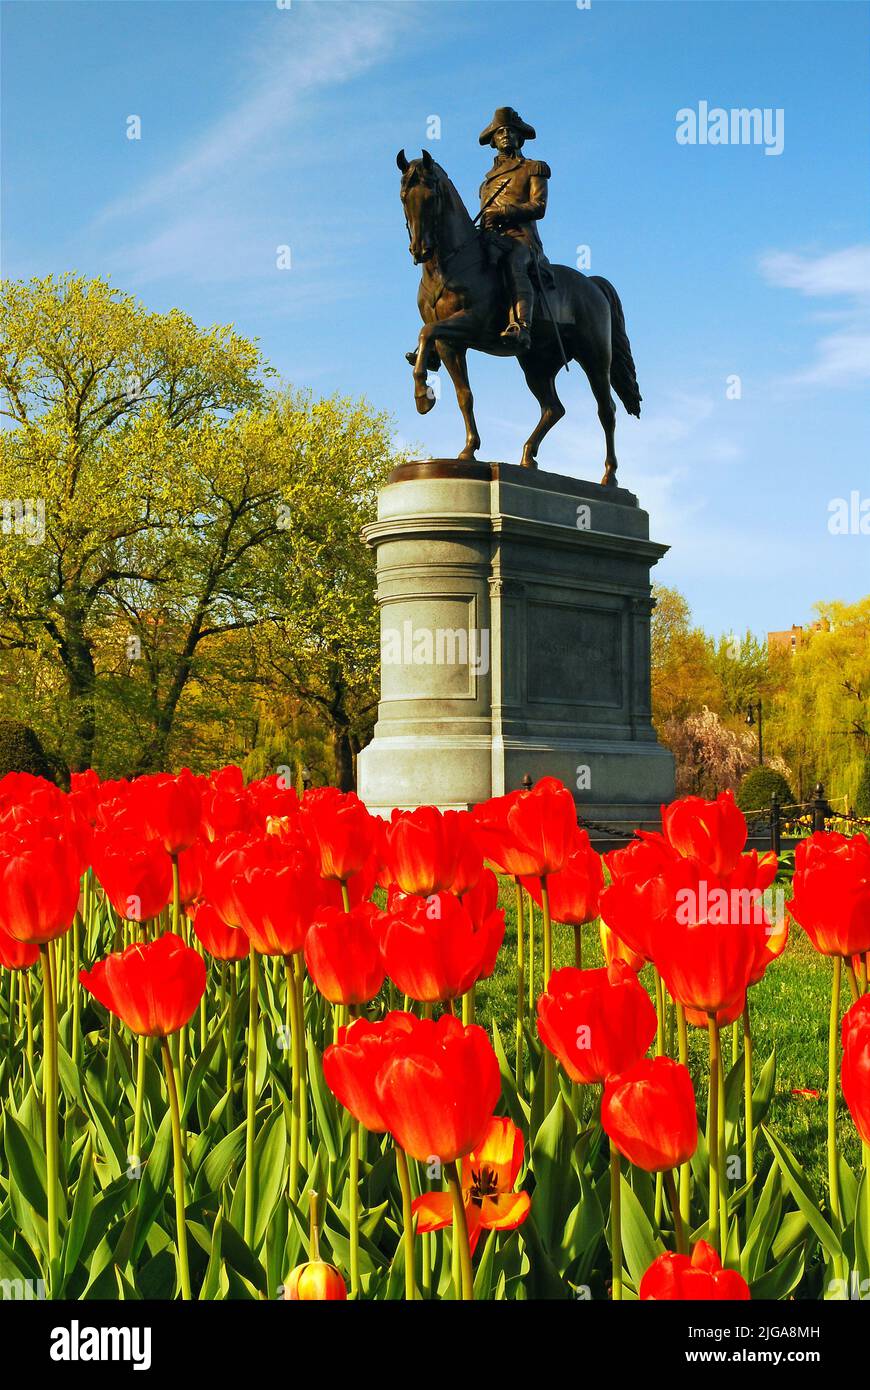 A sculpture of General George Washington riding on a horse is surrounded by tulips on a spring day in Boston Publik Garden near Boston Common Stock Photo